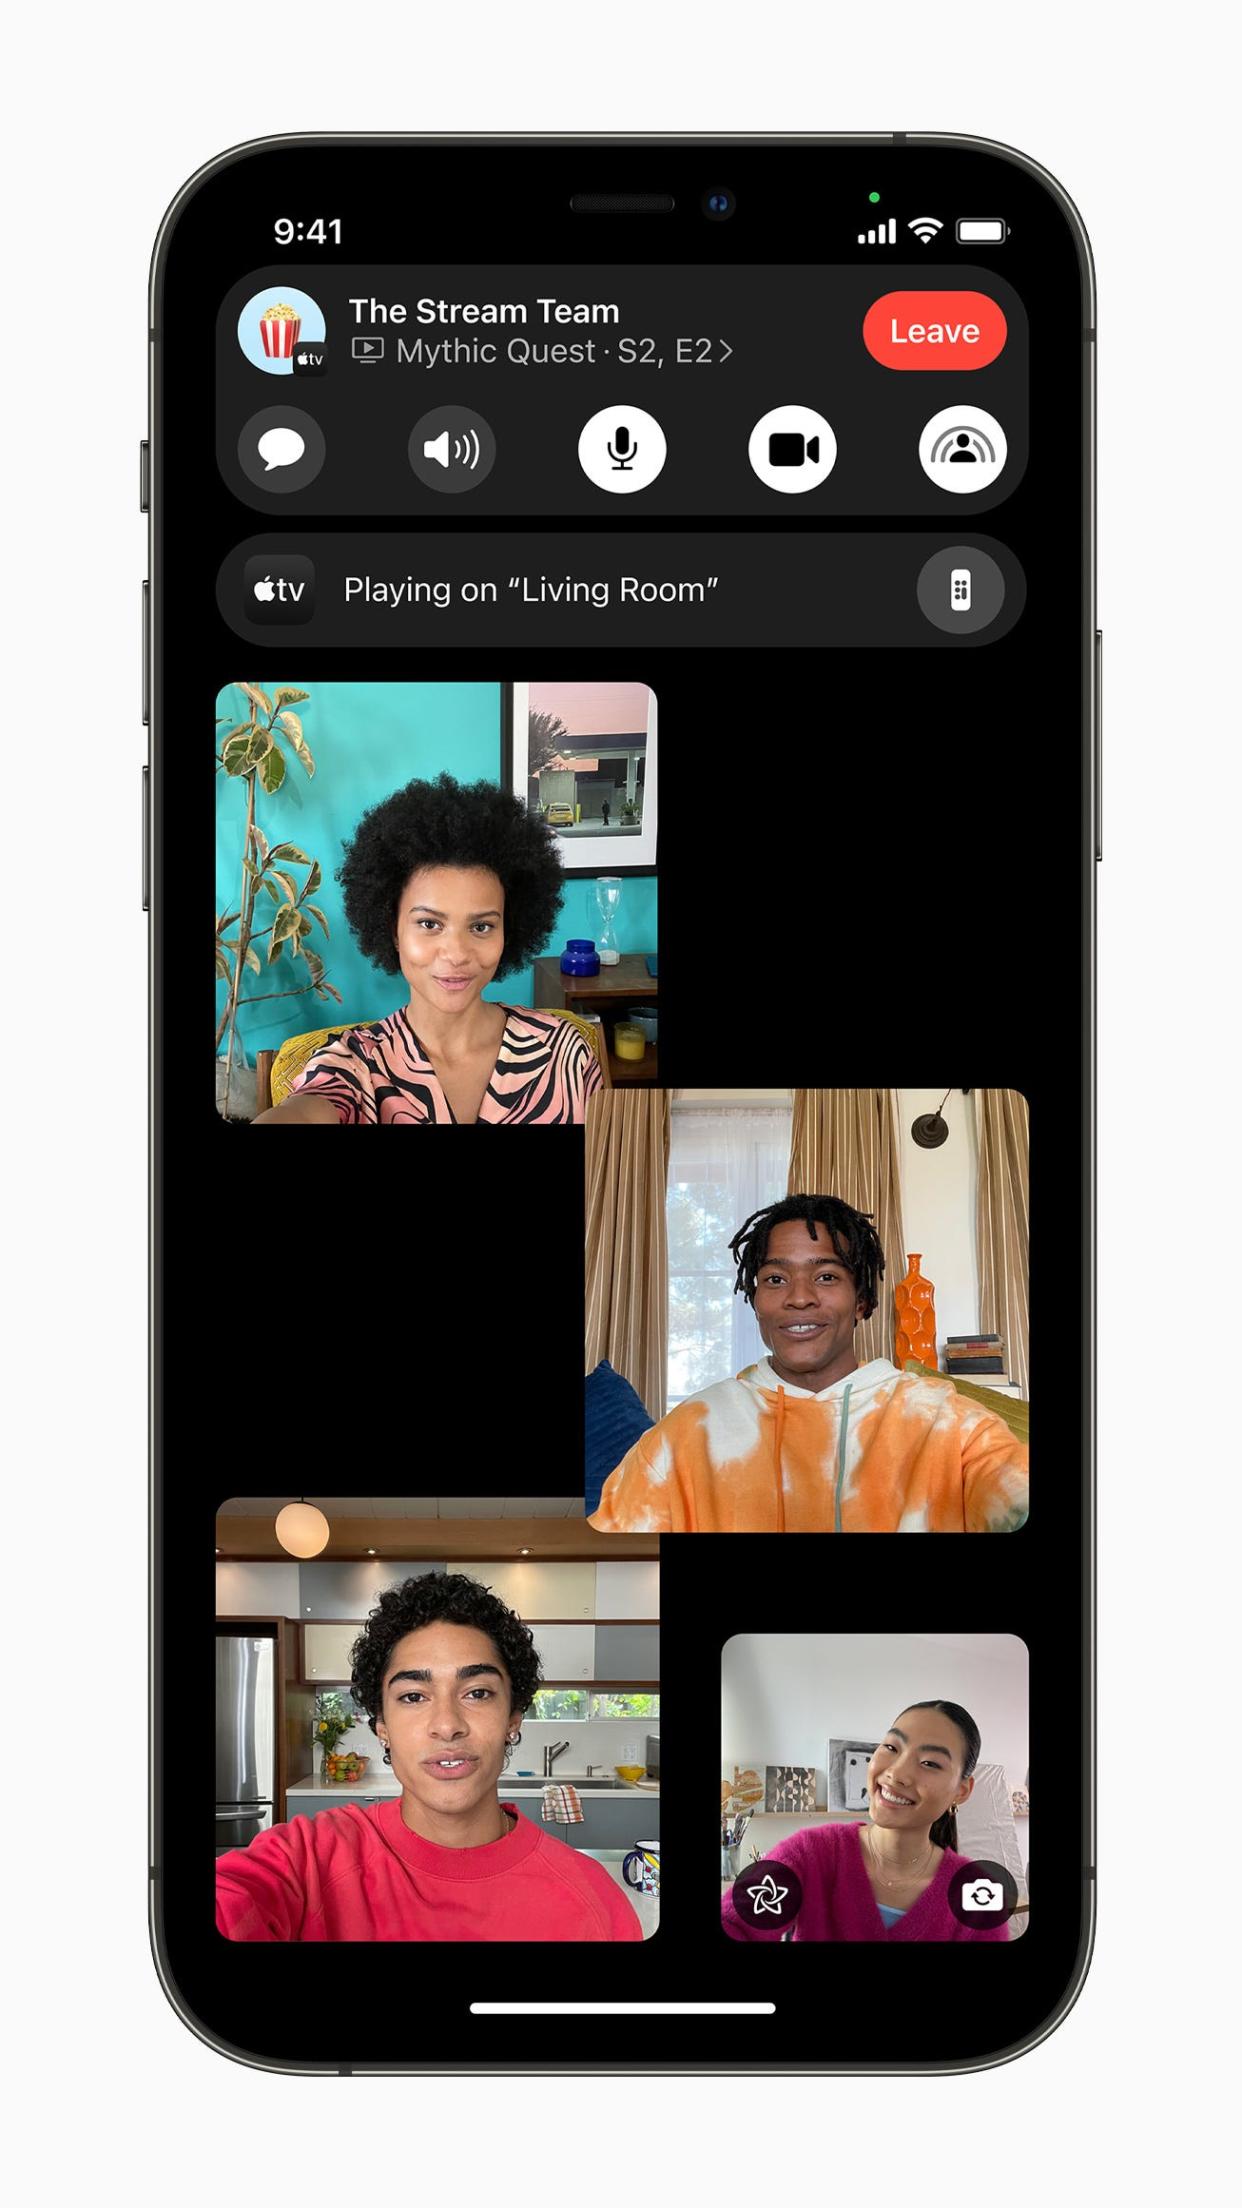 A screenshot of the SharePlay feature on FaceTime.